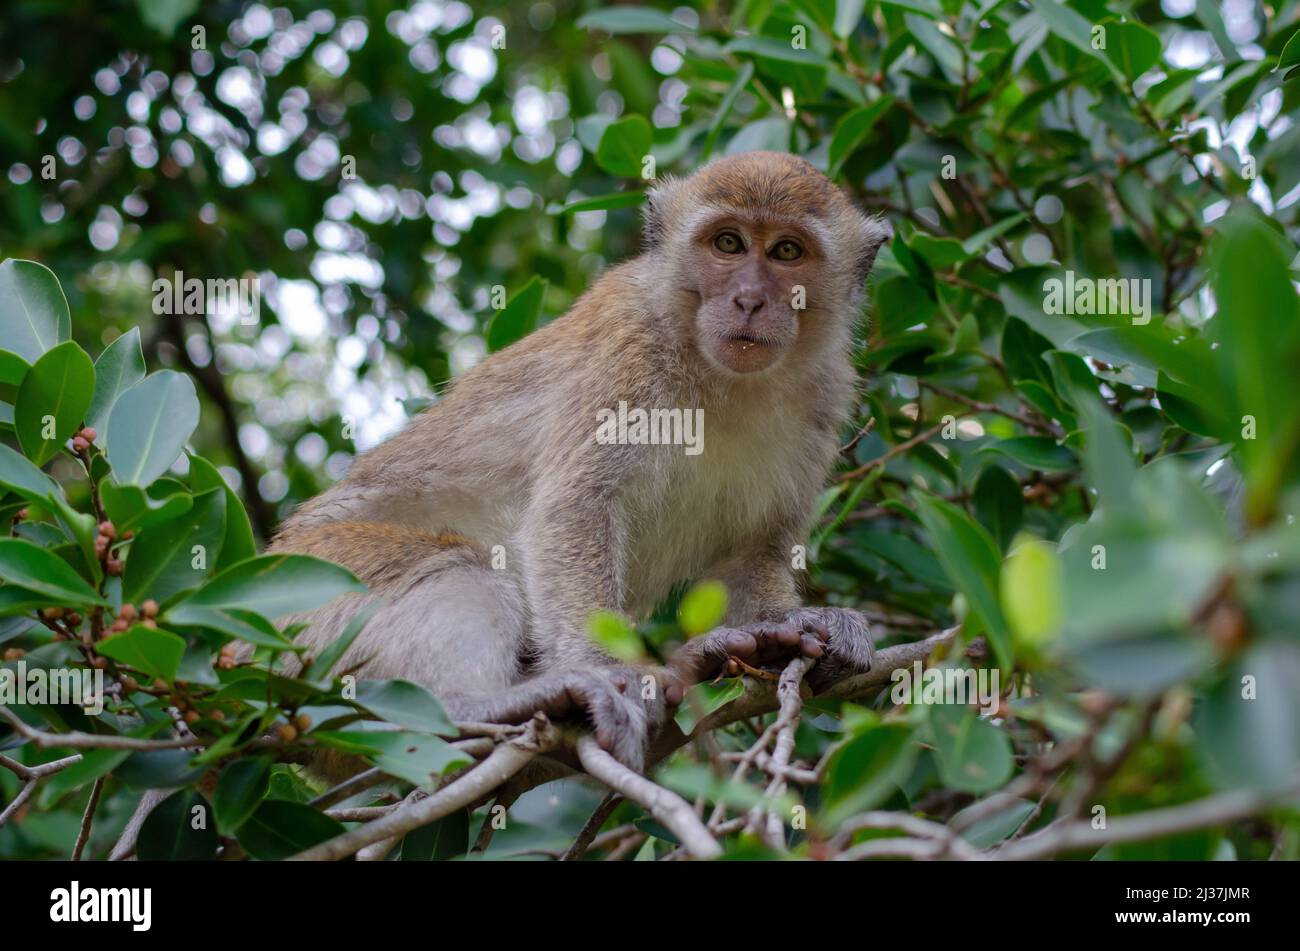 Long tailed macaque Monkey eat fruit at trees. Malaysia rainforest animal. Stock Photo